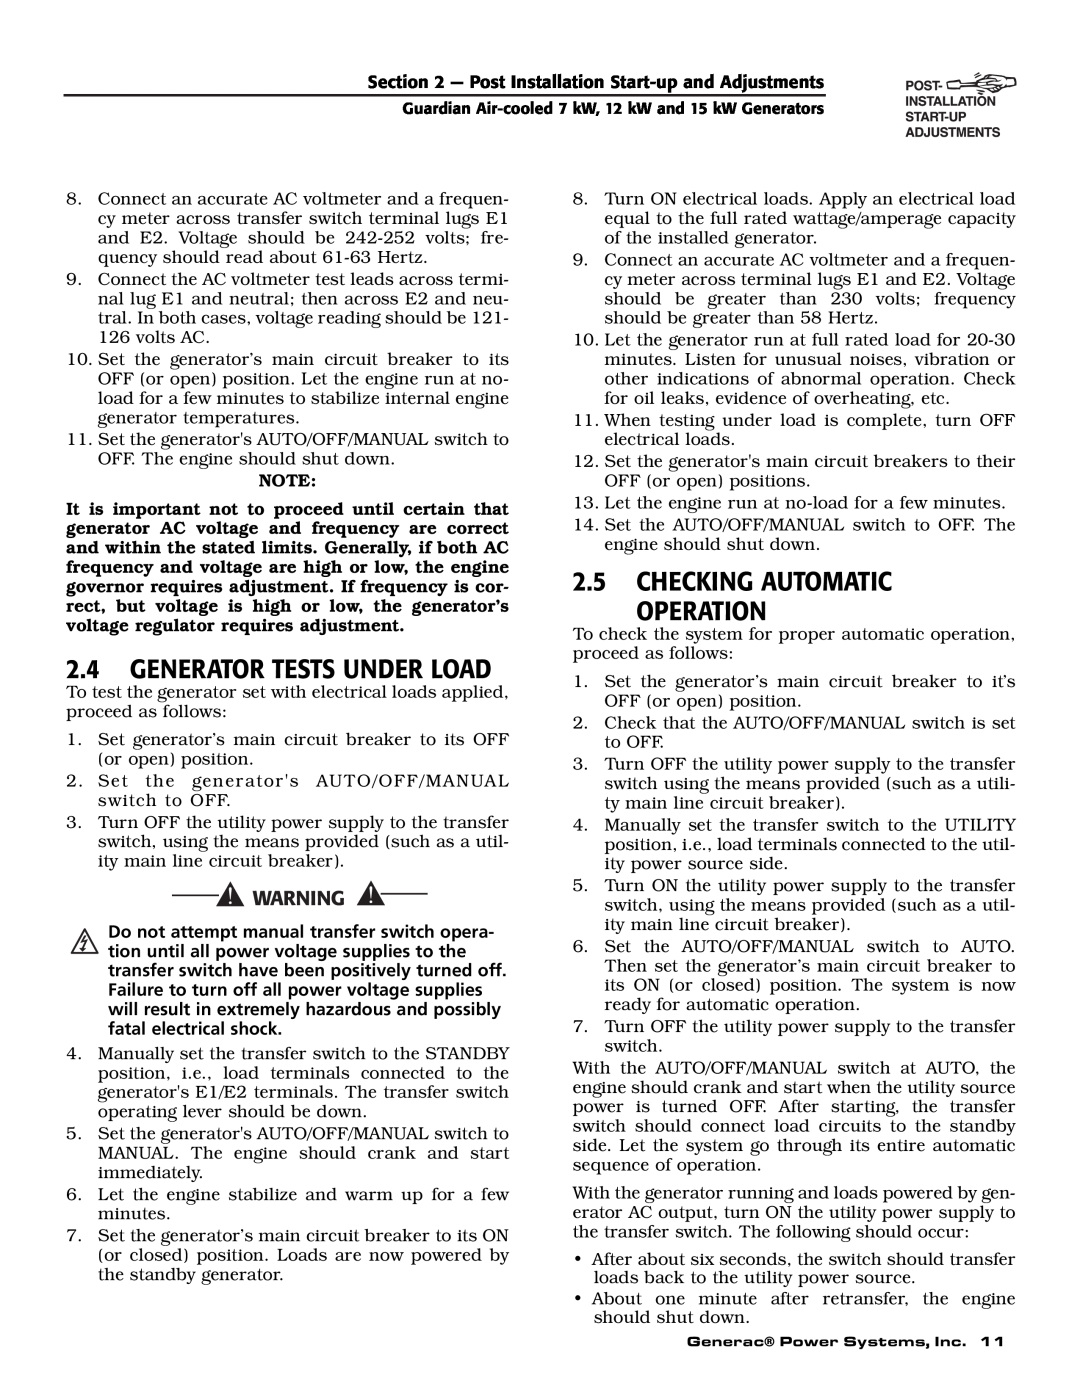 Generac Power Systems 04758-1, 04759-1, 04760-1 owner manual Generator Tests Under Load, Checking Automatic Operation 